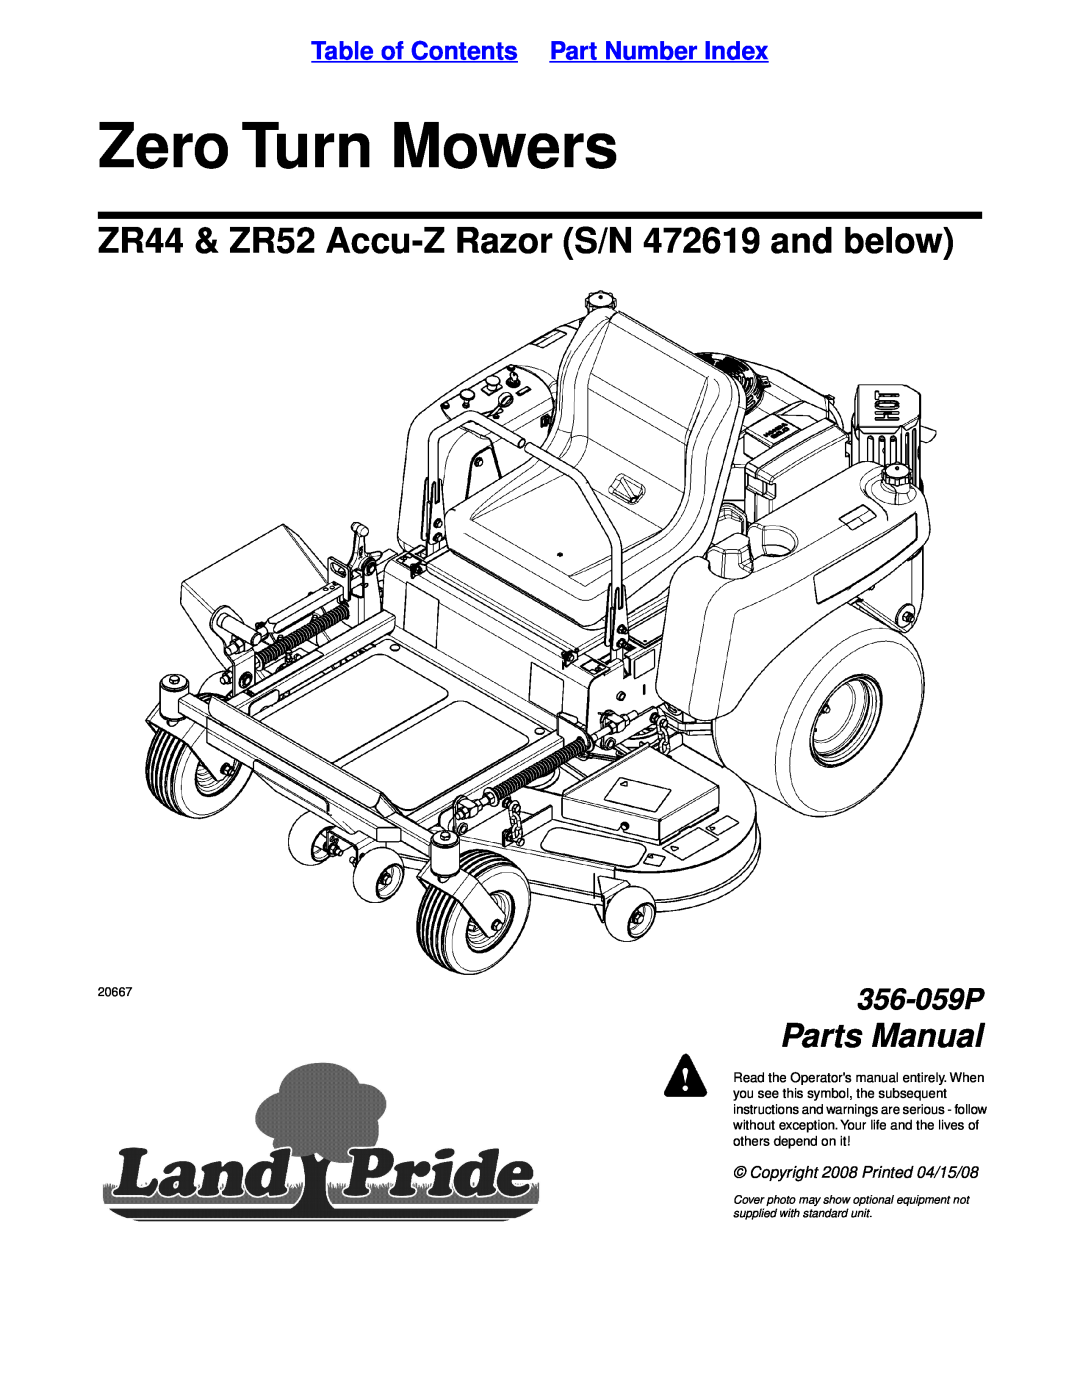 Land Pride manual Table of Contents Part Number Index, Zero Turn Mowers, ZR44 & ZR52 Accu-ZRazor S/N 472619 and below 